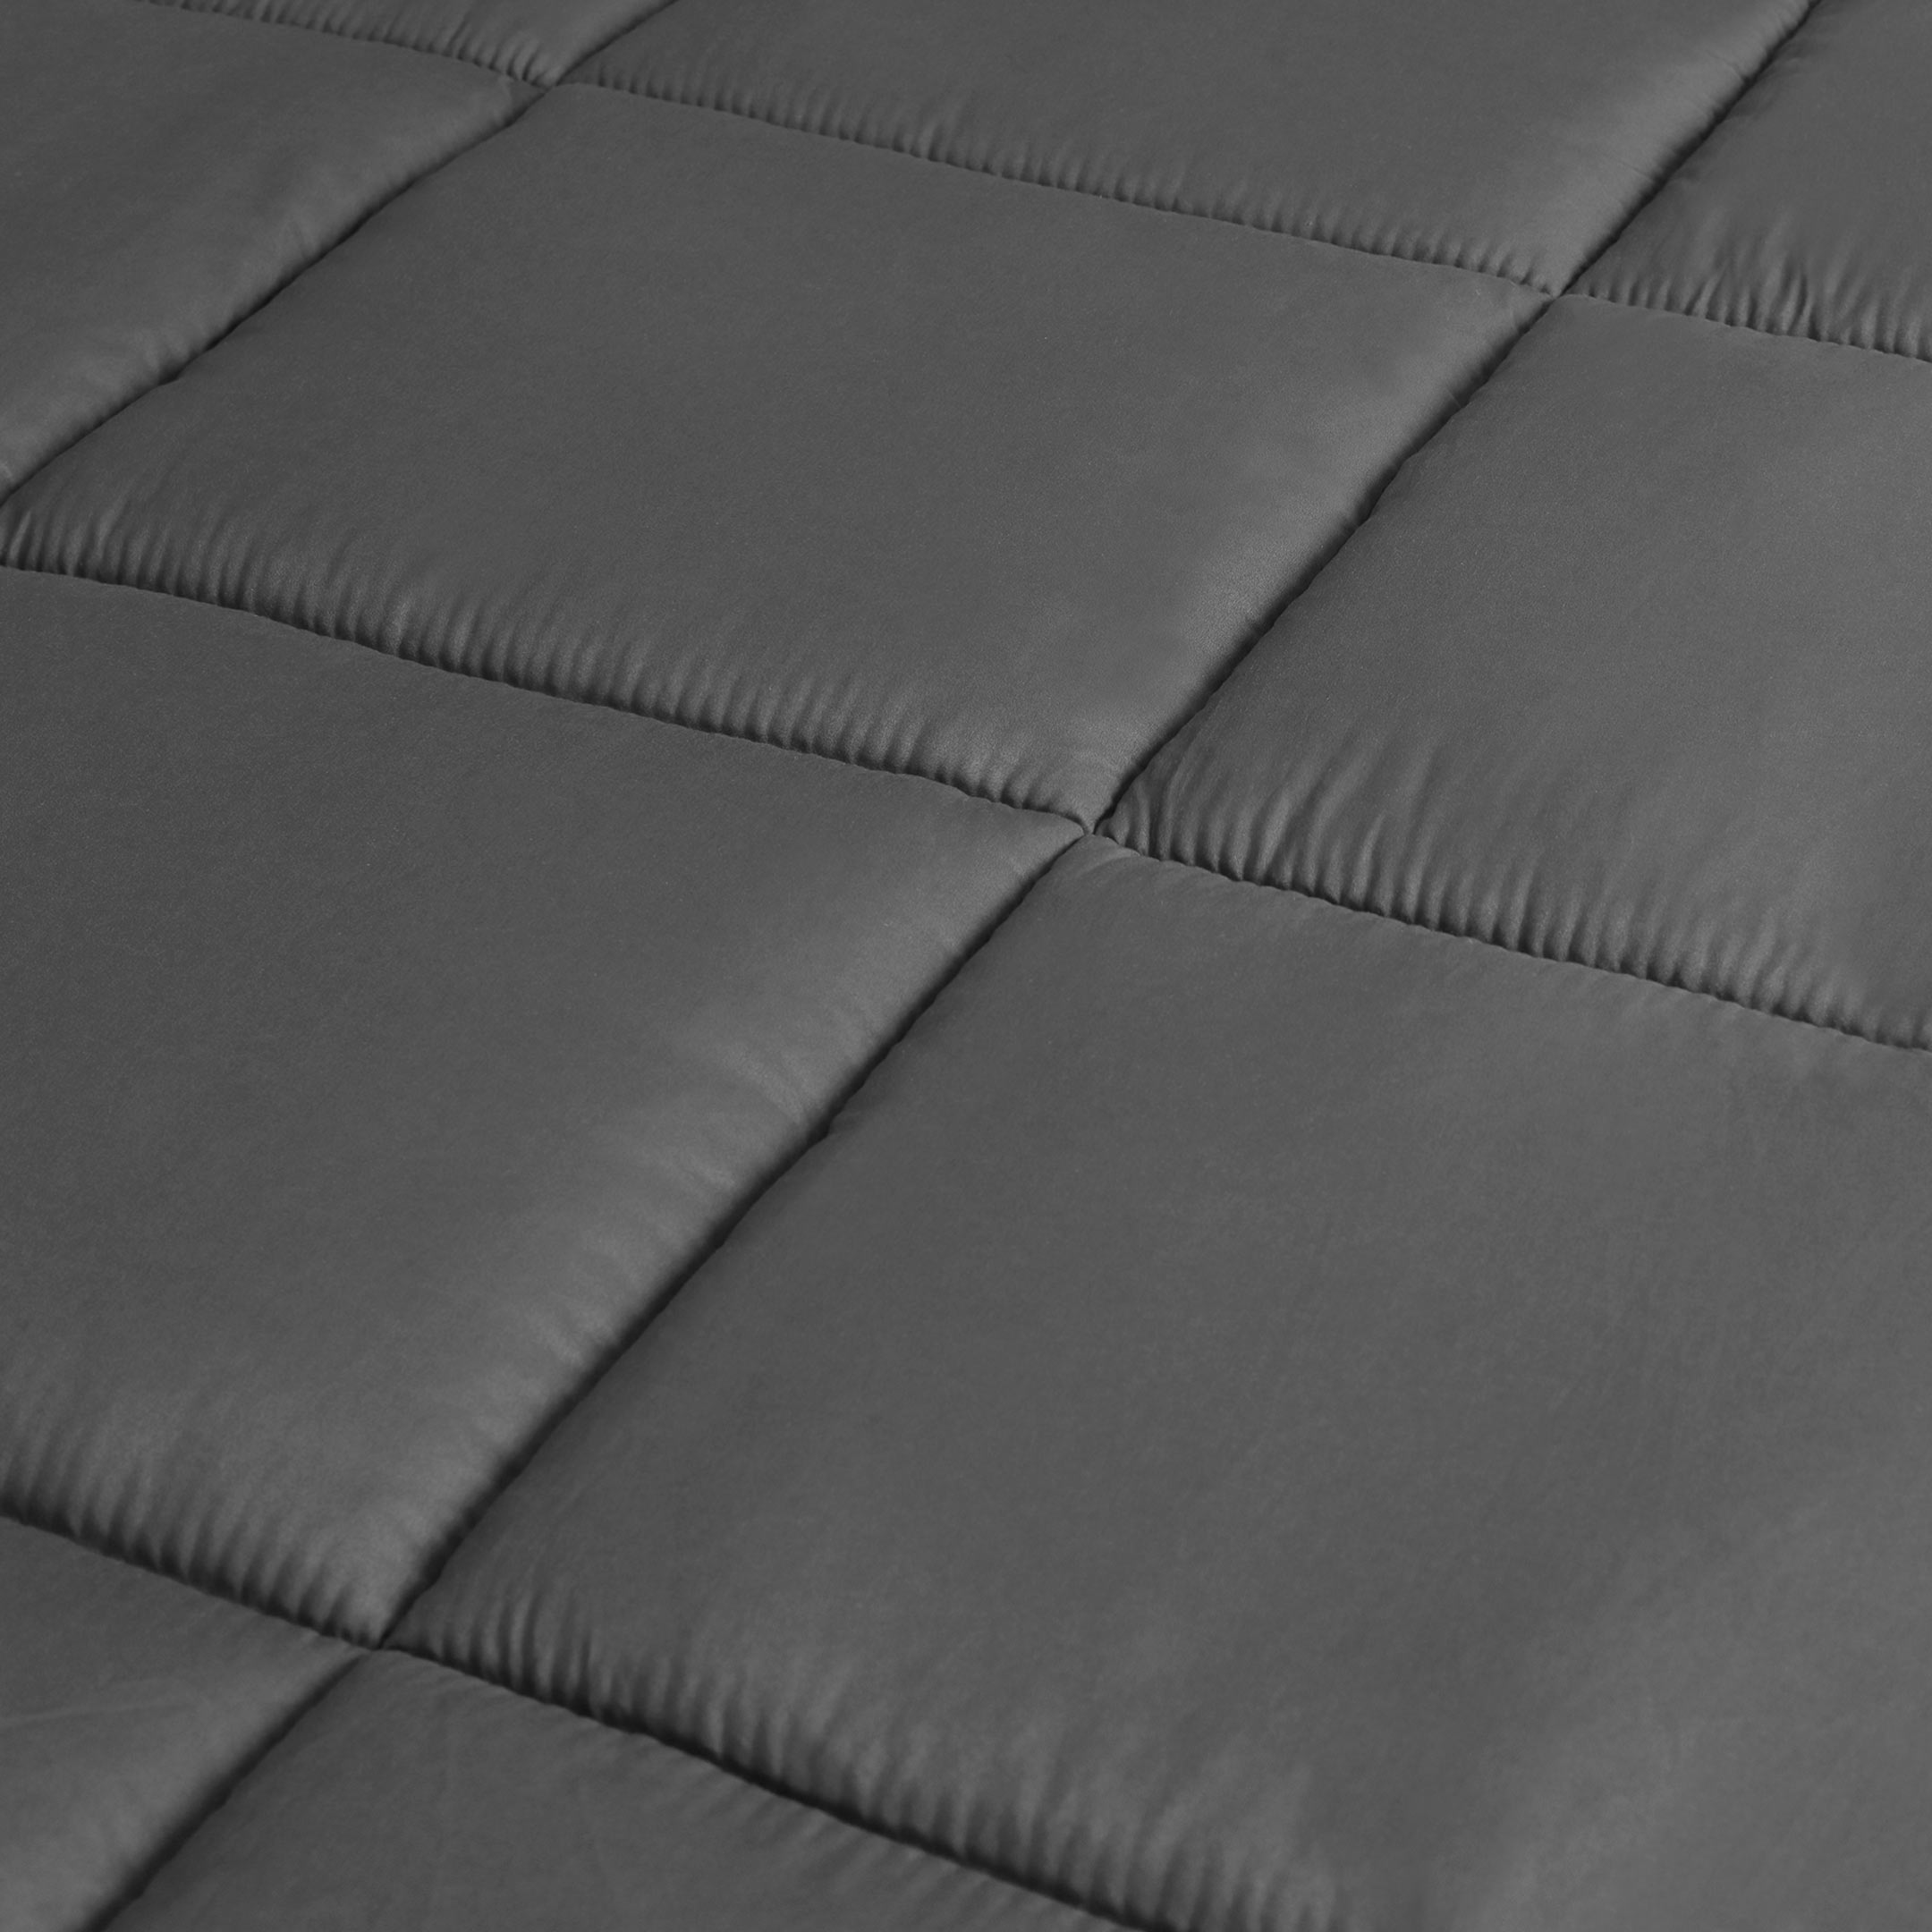 Square Quilted Mattress Topper Grey